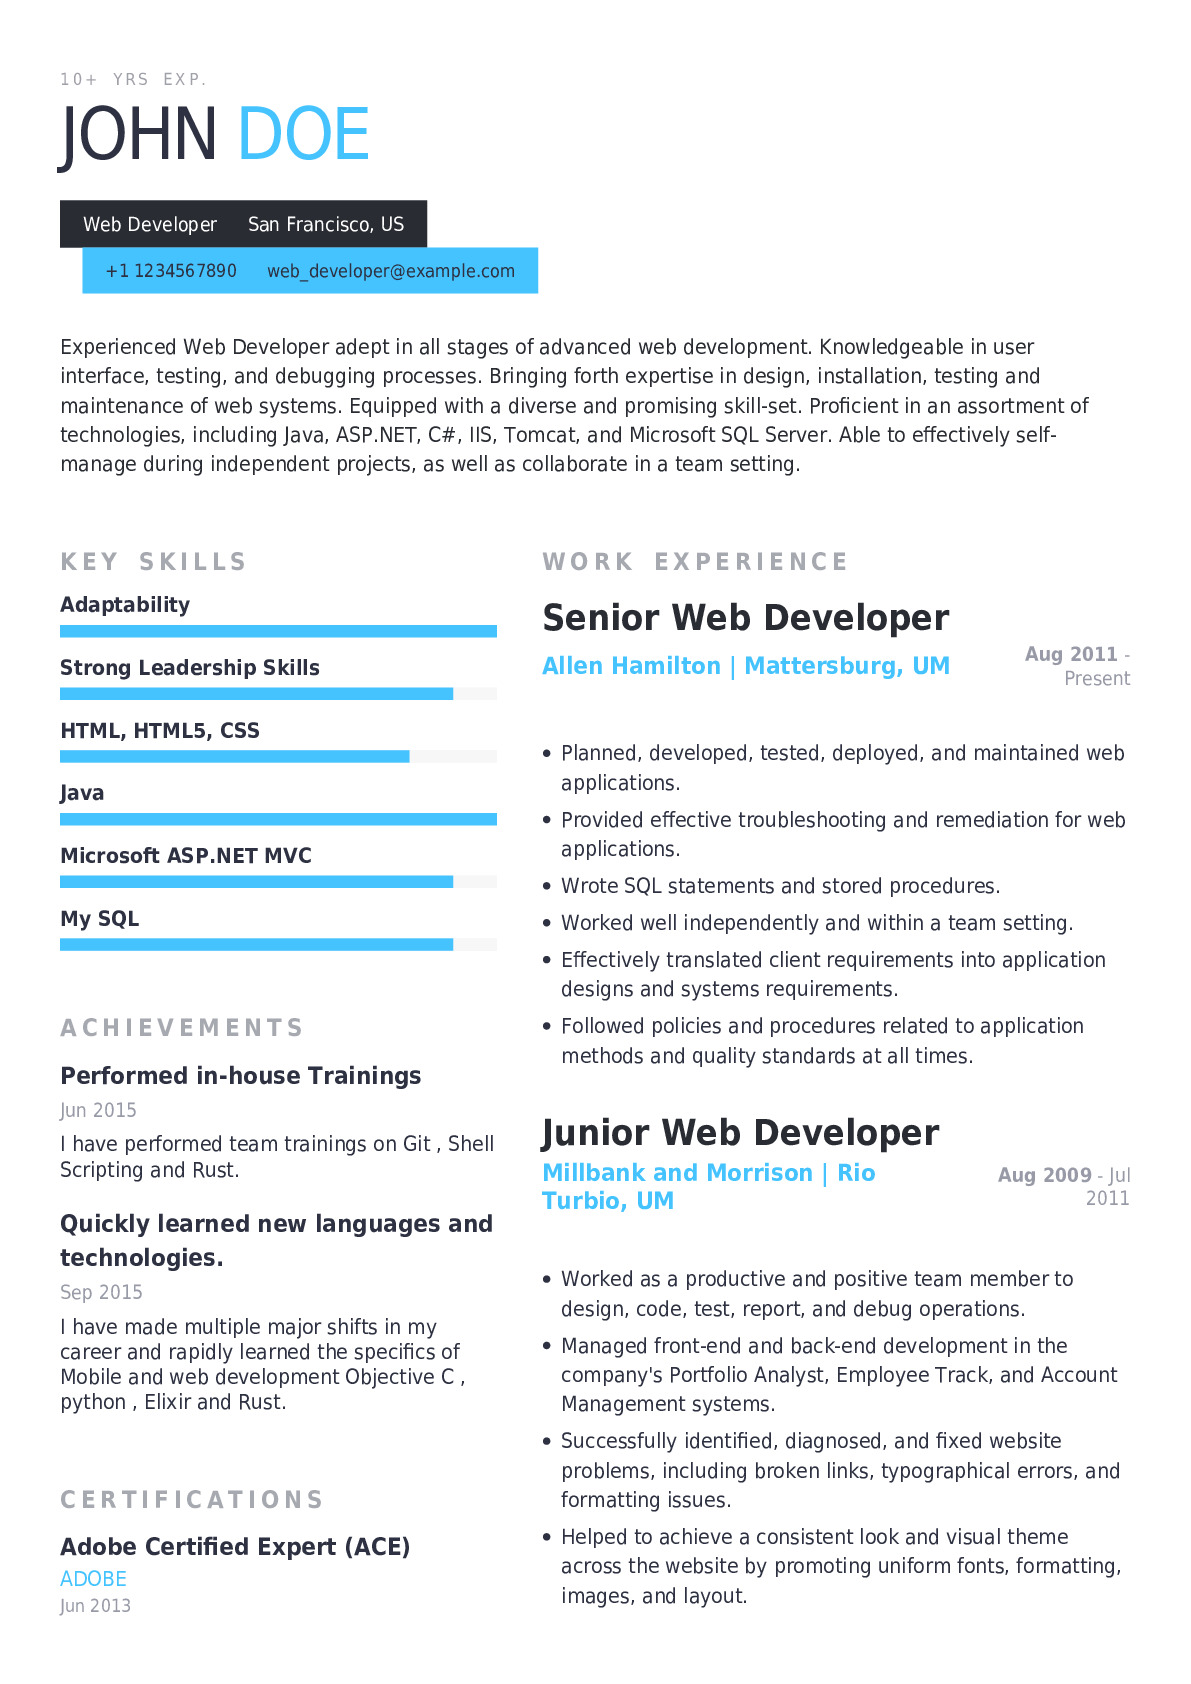 Web Developer Resume Example With Real Content